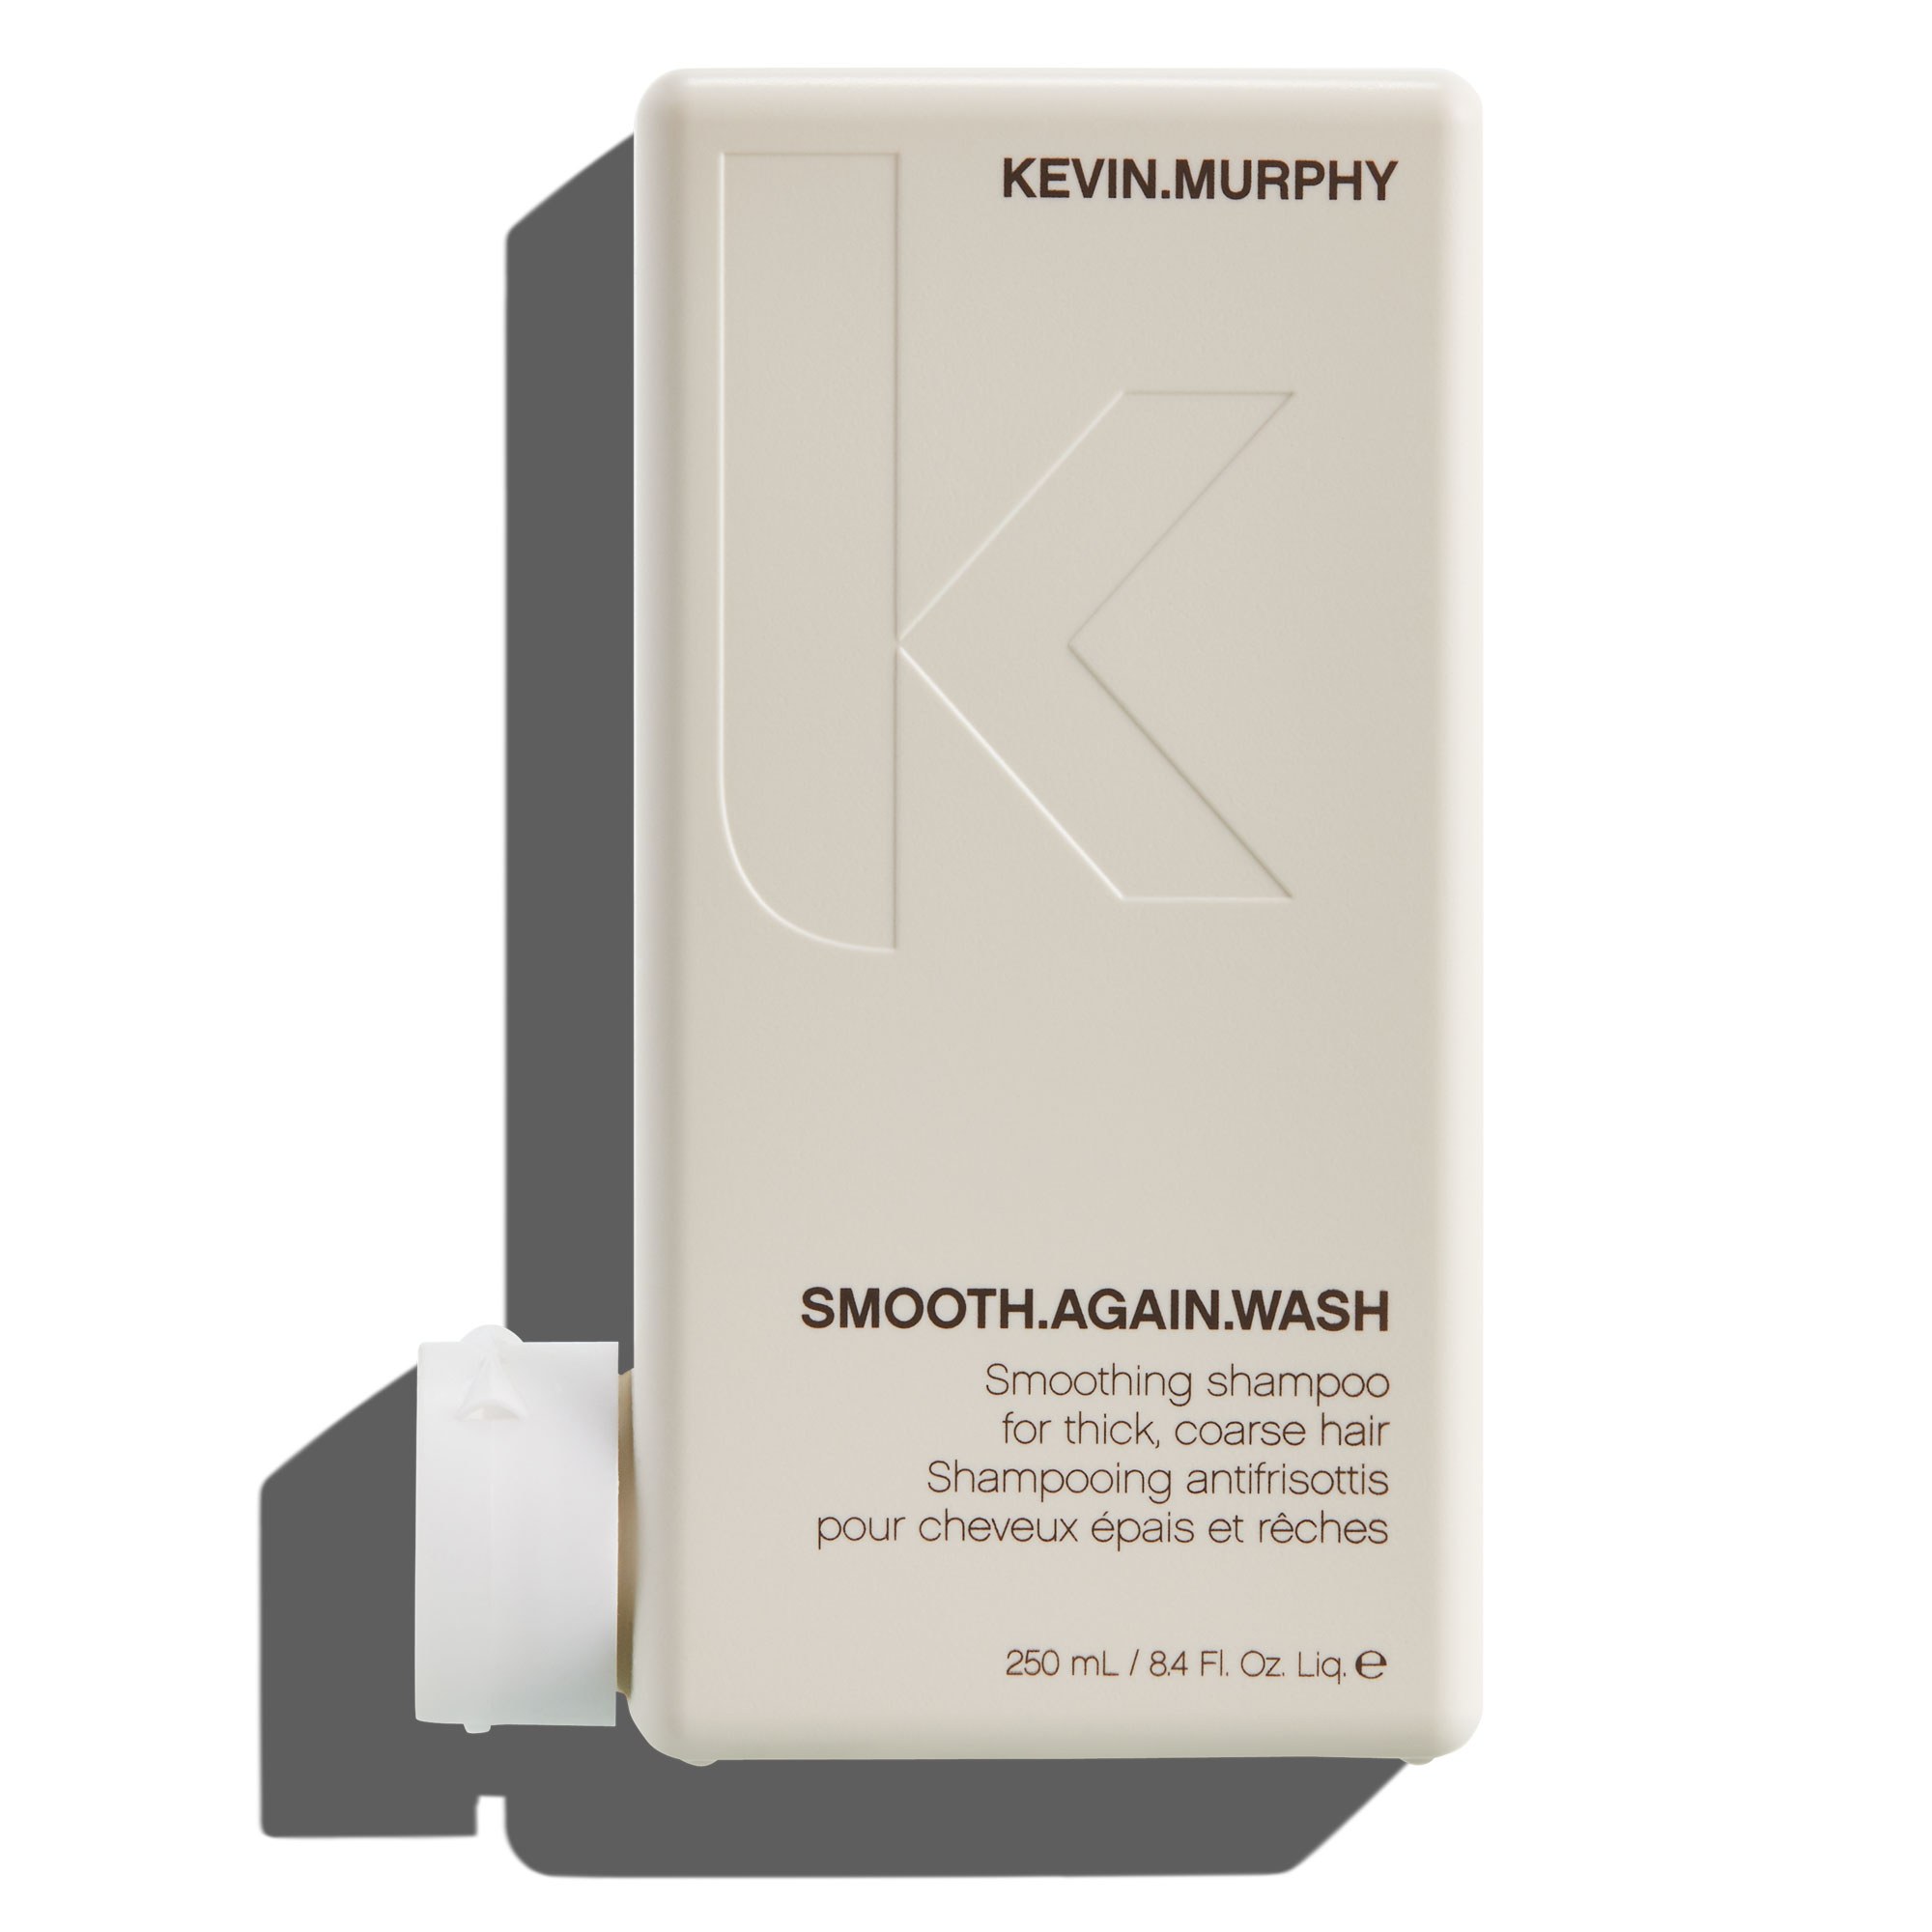 KEVIN.MURPHY SMOOTH.AGAIN Wash